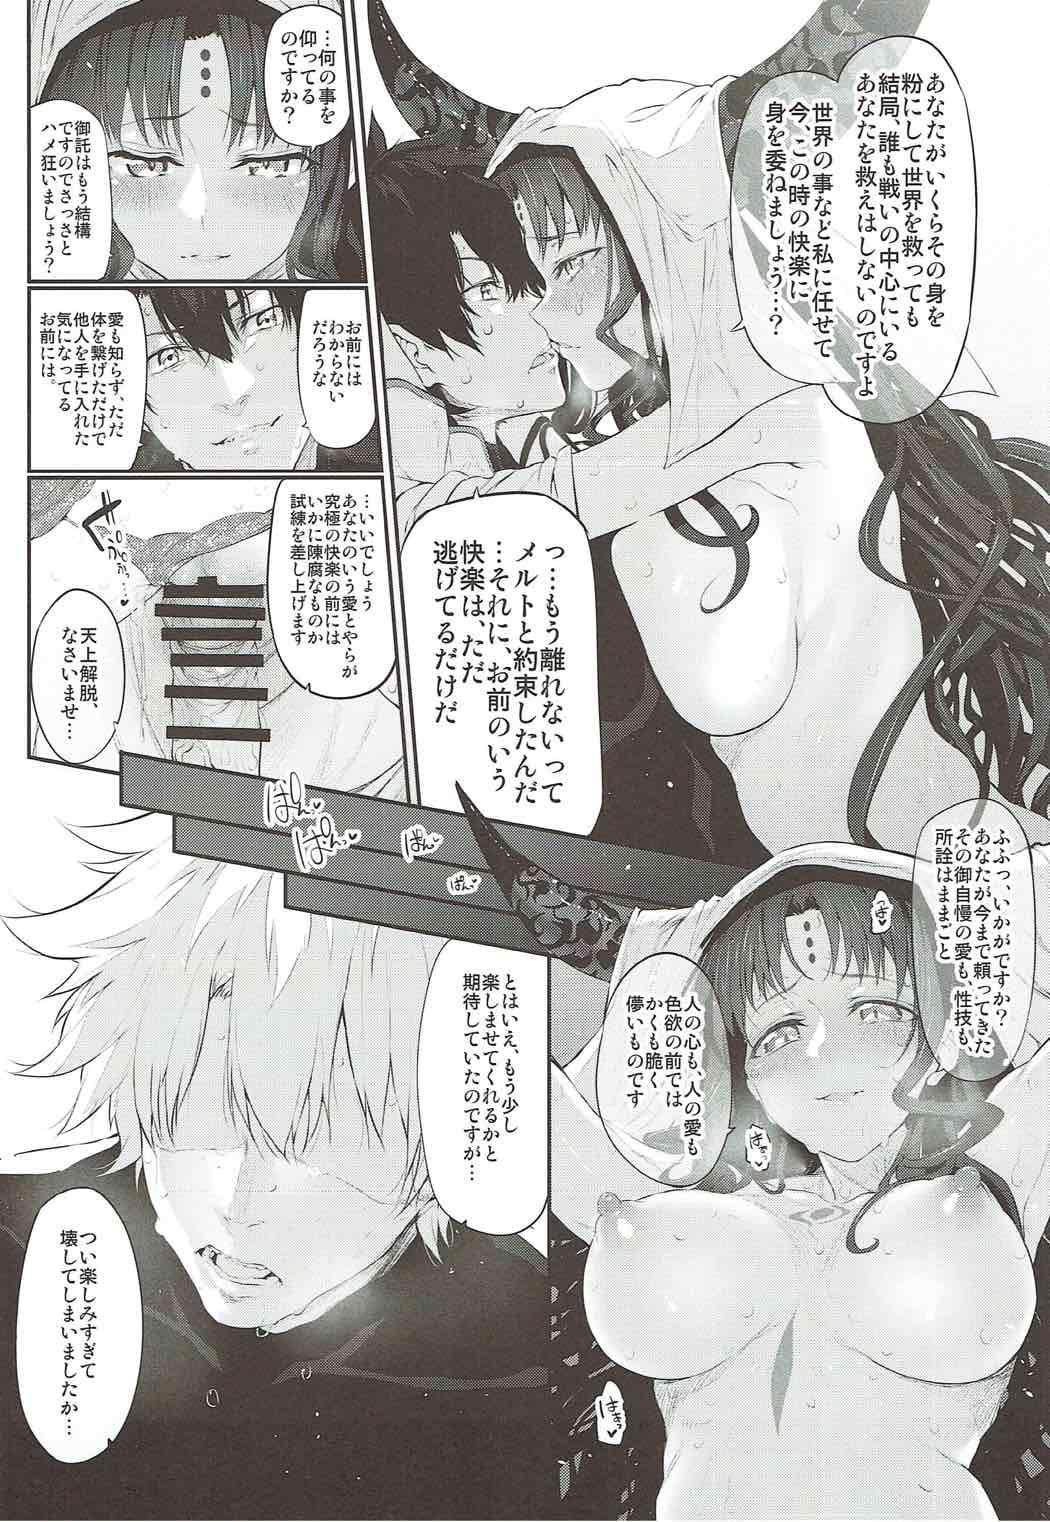 Couple Porn Marked Girls Vol. 15 - Fate grand order Gangbang - Page 9